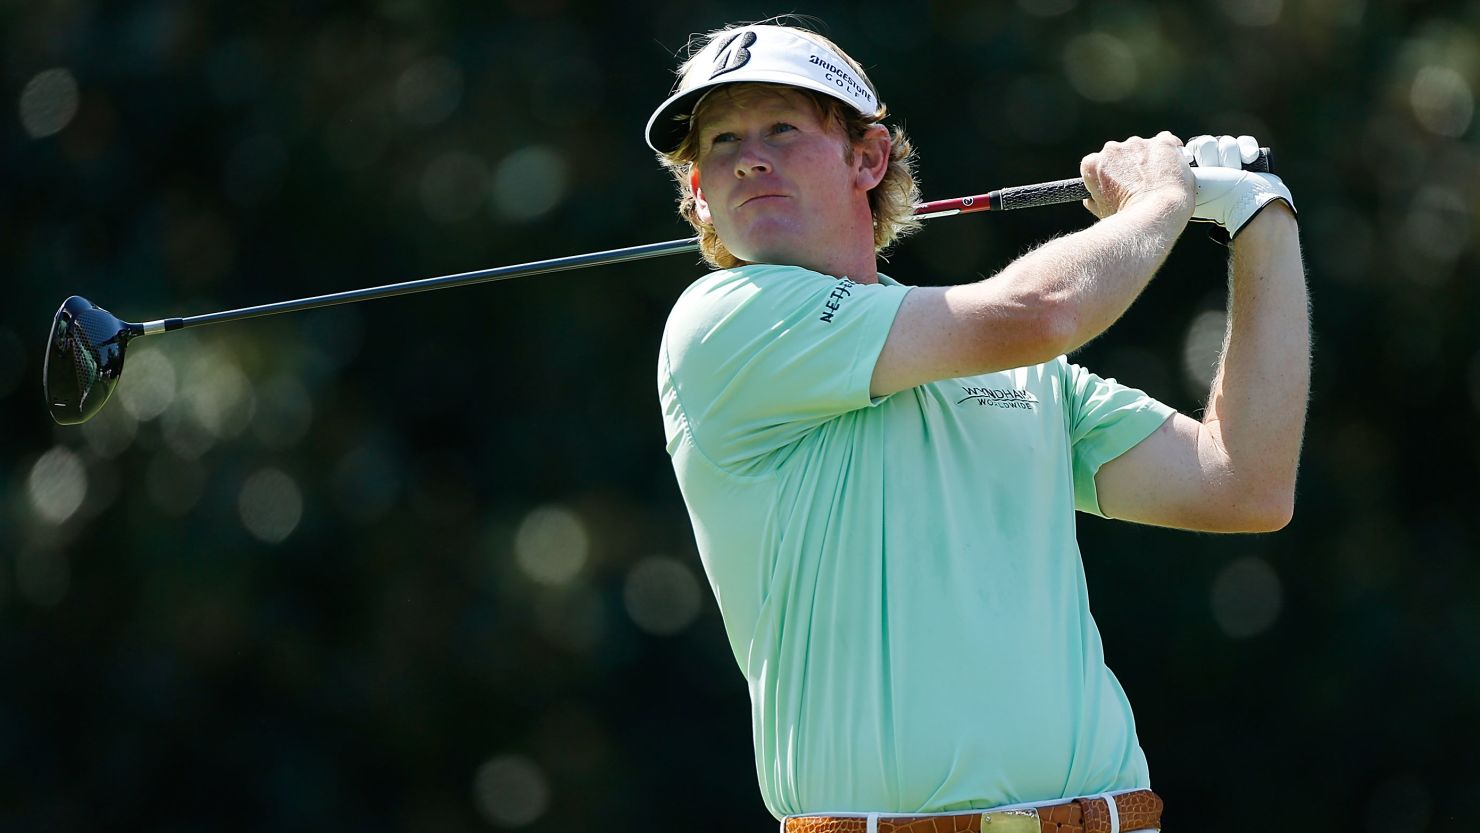 Brandt Snedeker tees off on his way to his six-under 64 at East Lakes in the Tour Championship.